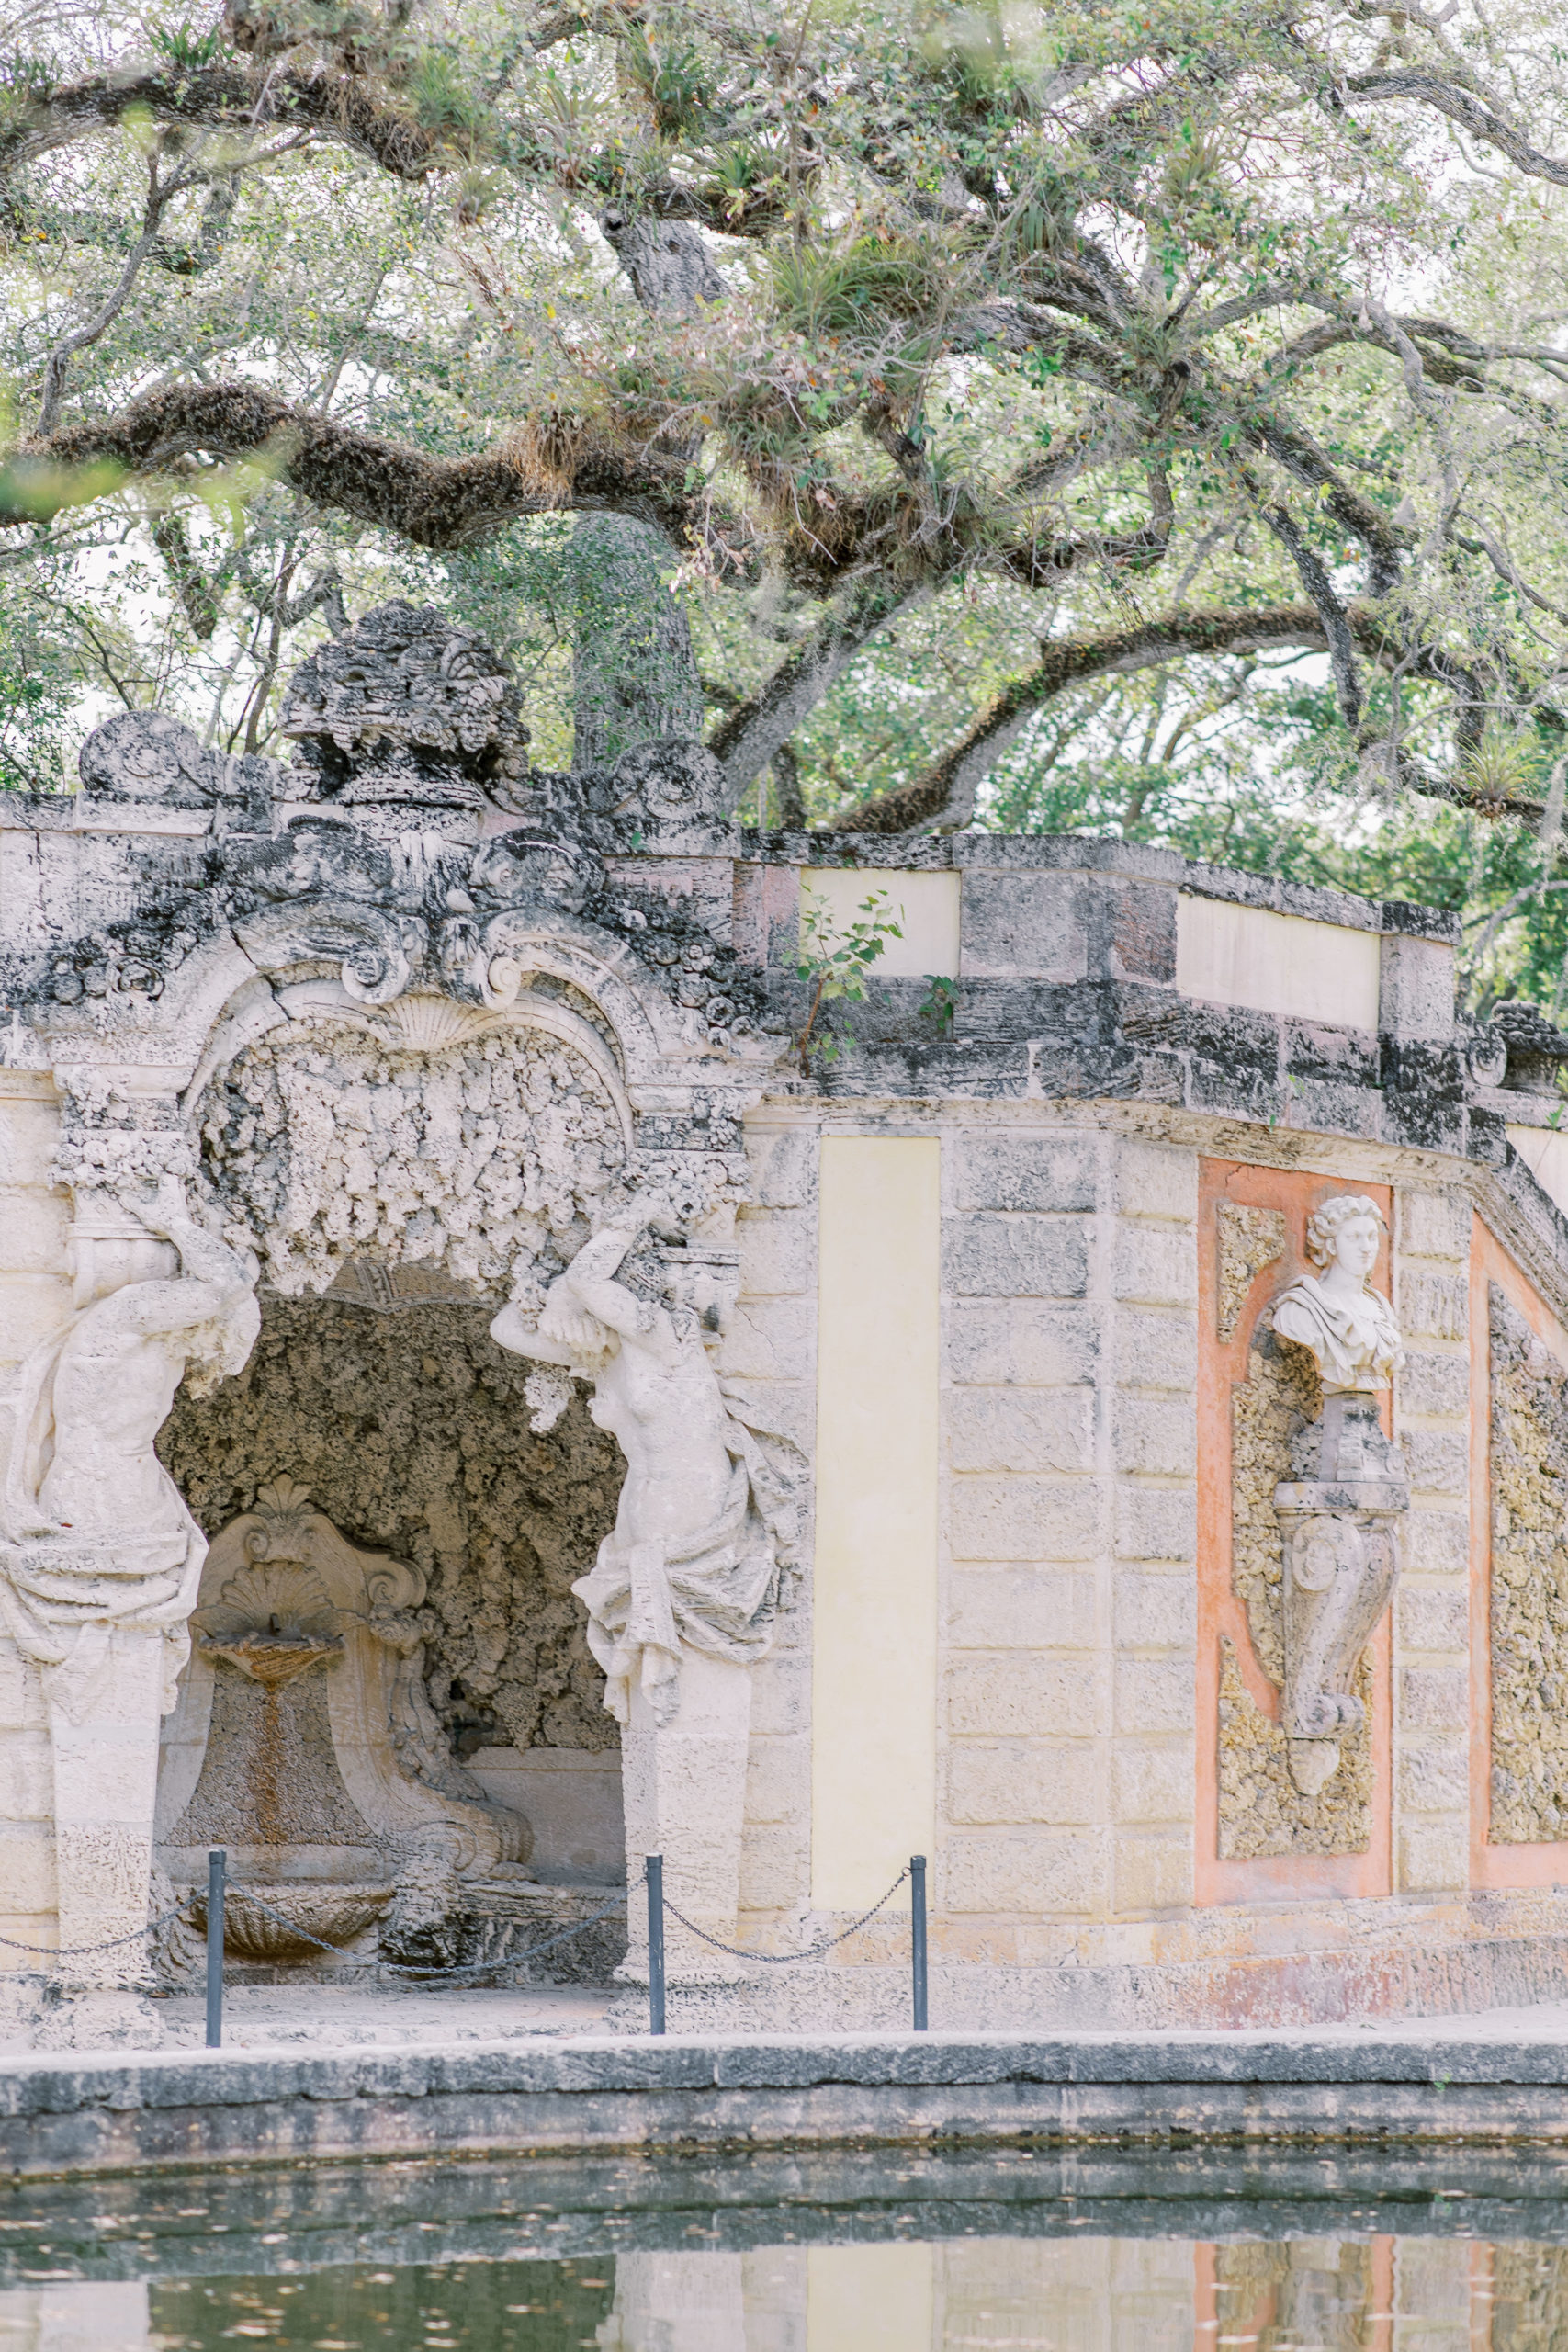 Reflecting pool with intricate stonework and spanish moss trees